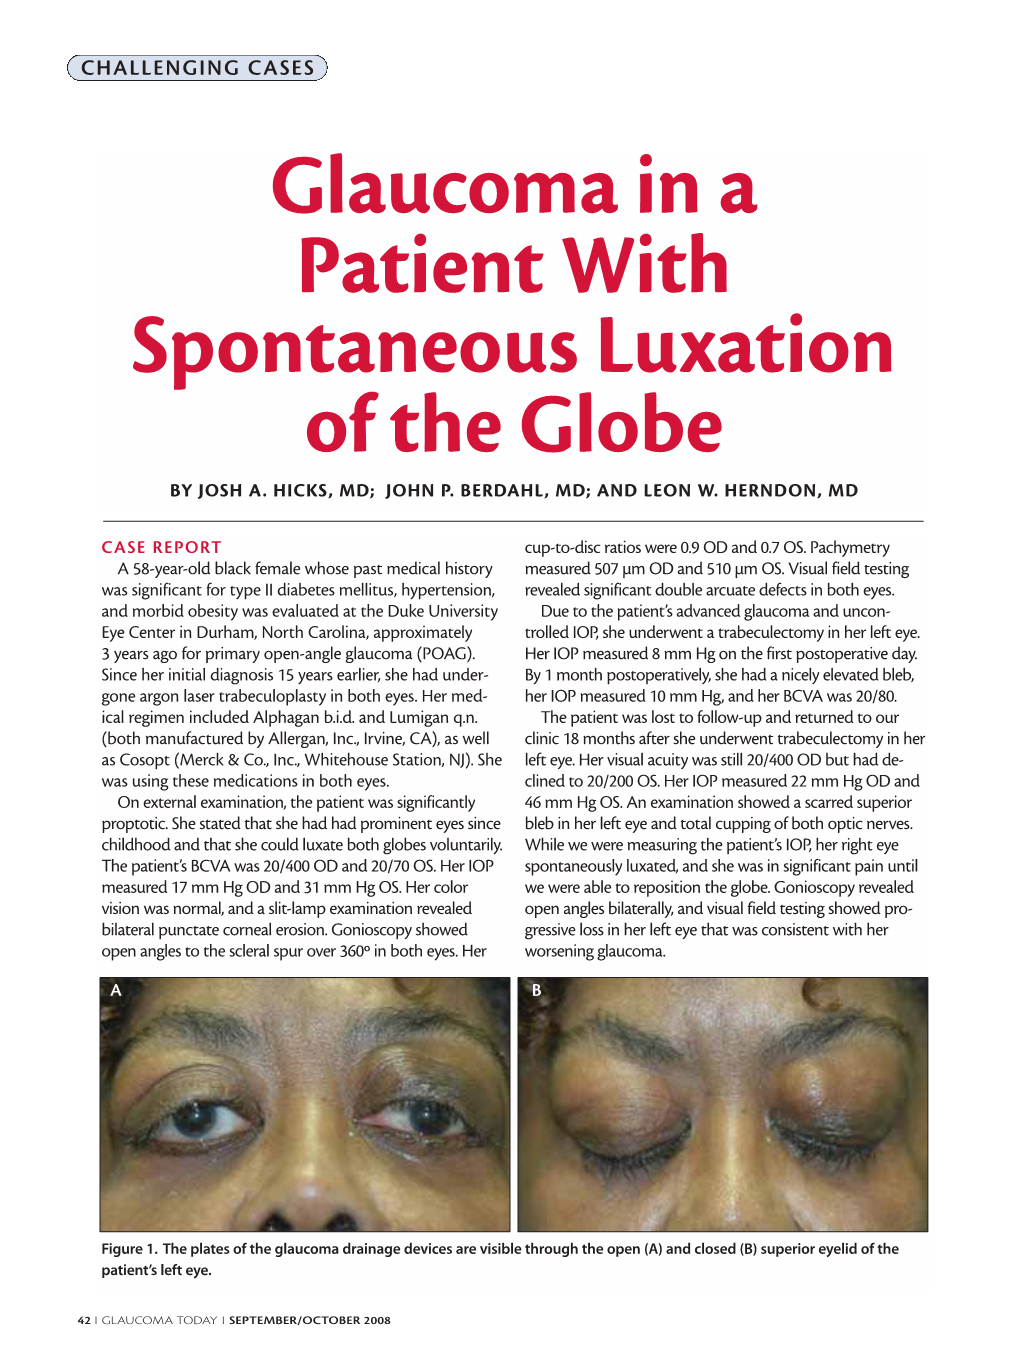 Glaucoma in a Patient with Spontaneous Luxation of the Globe by JOSH A